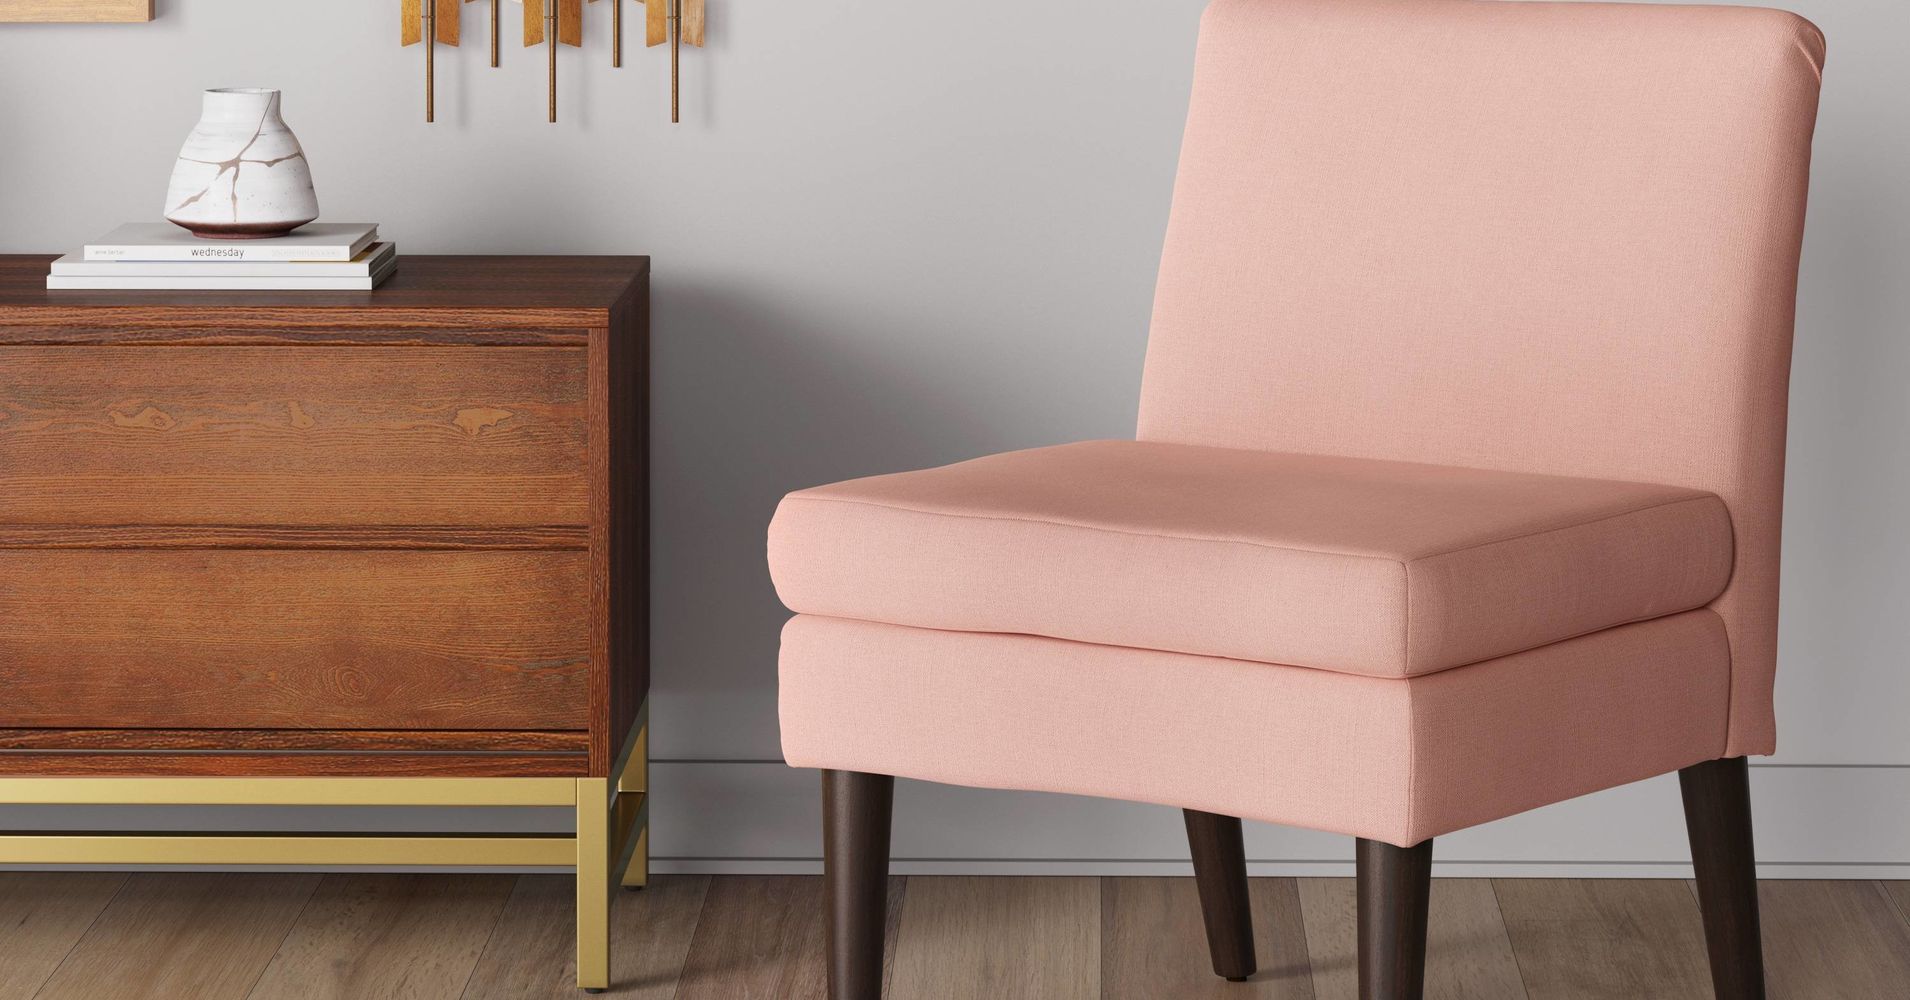 How To Incorporate Blush Pink Decor Into Your Home | HuffPost